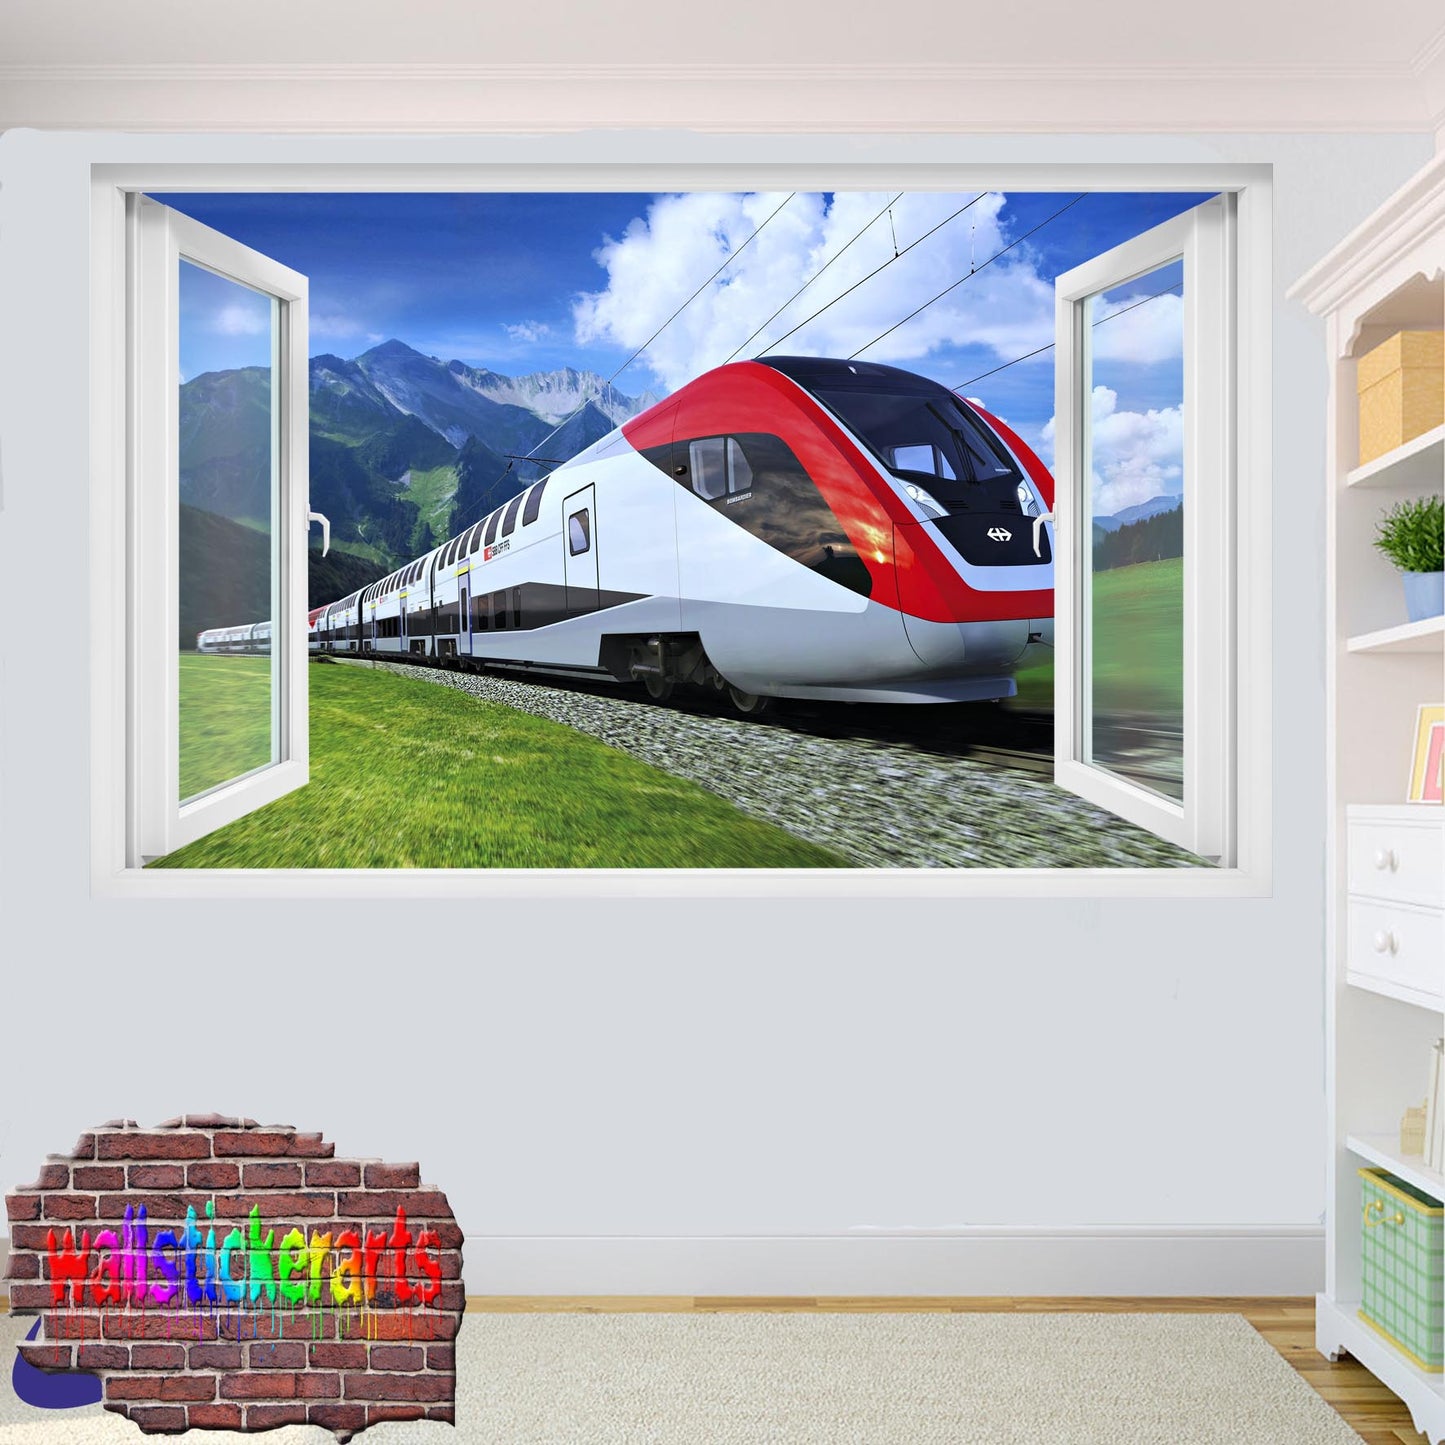 Fast Track Modern Train 3d Art Smashed Effect Wall Sticker Room Office Nursery Shop Decoration Decal Mural XH0